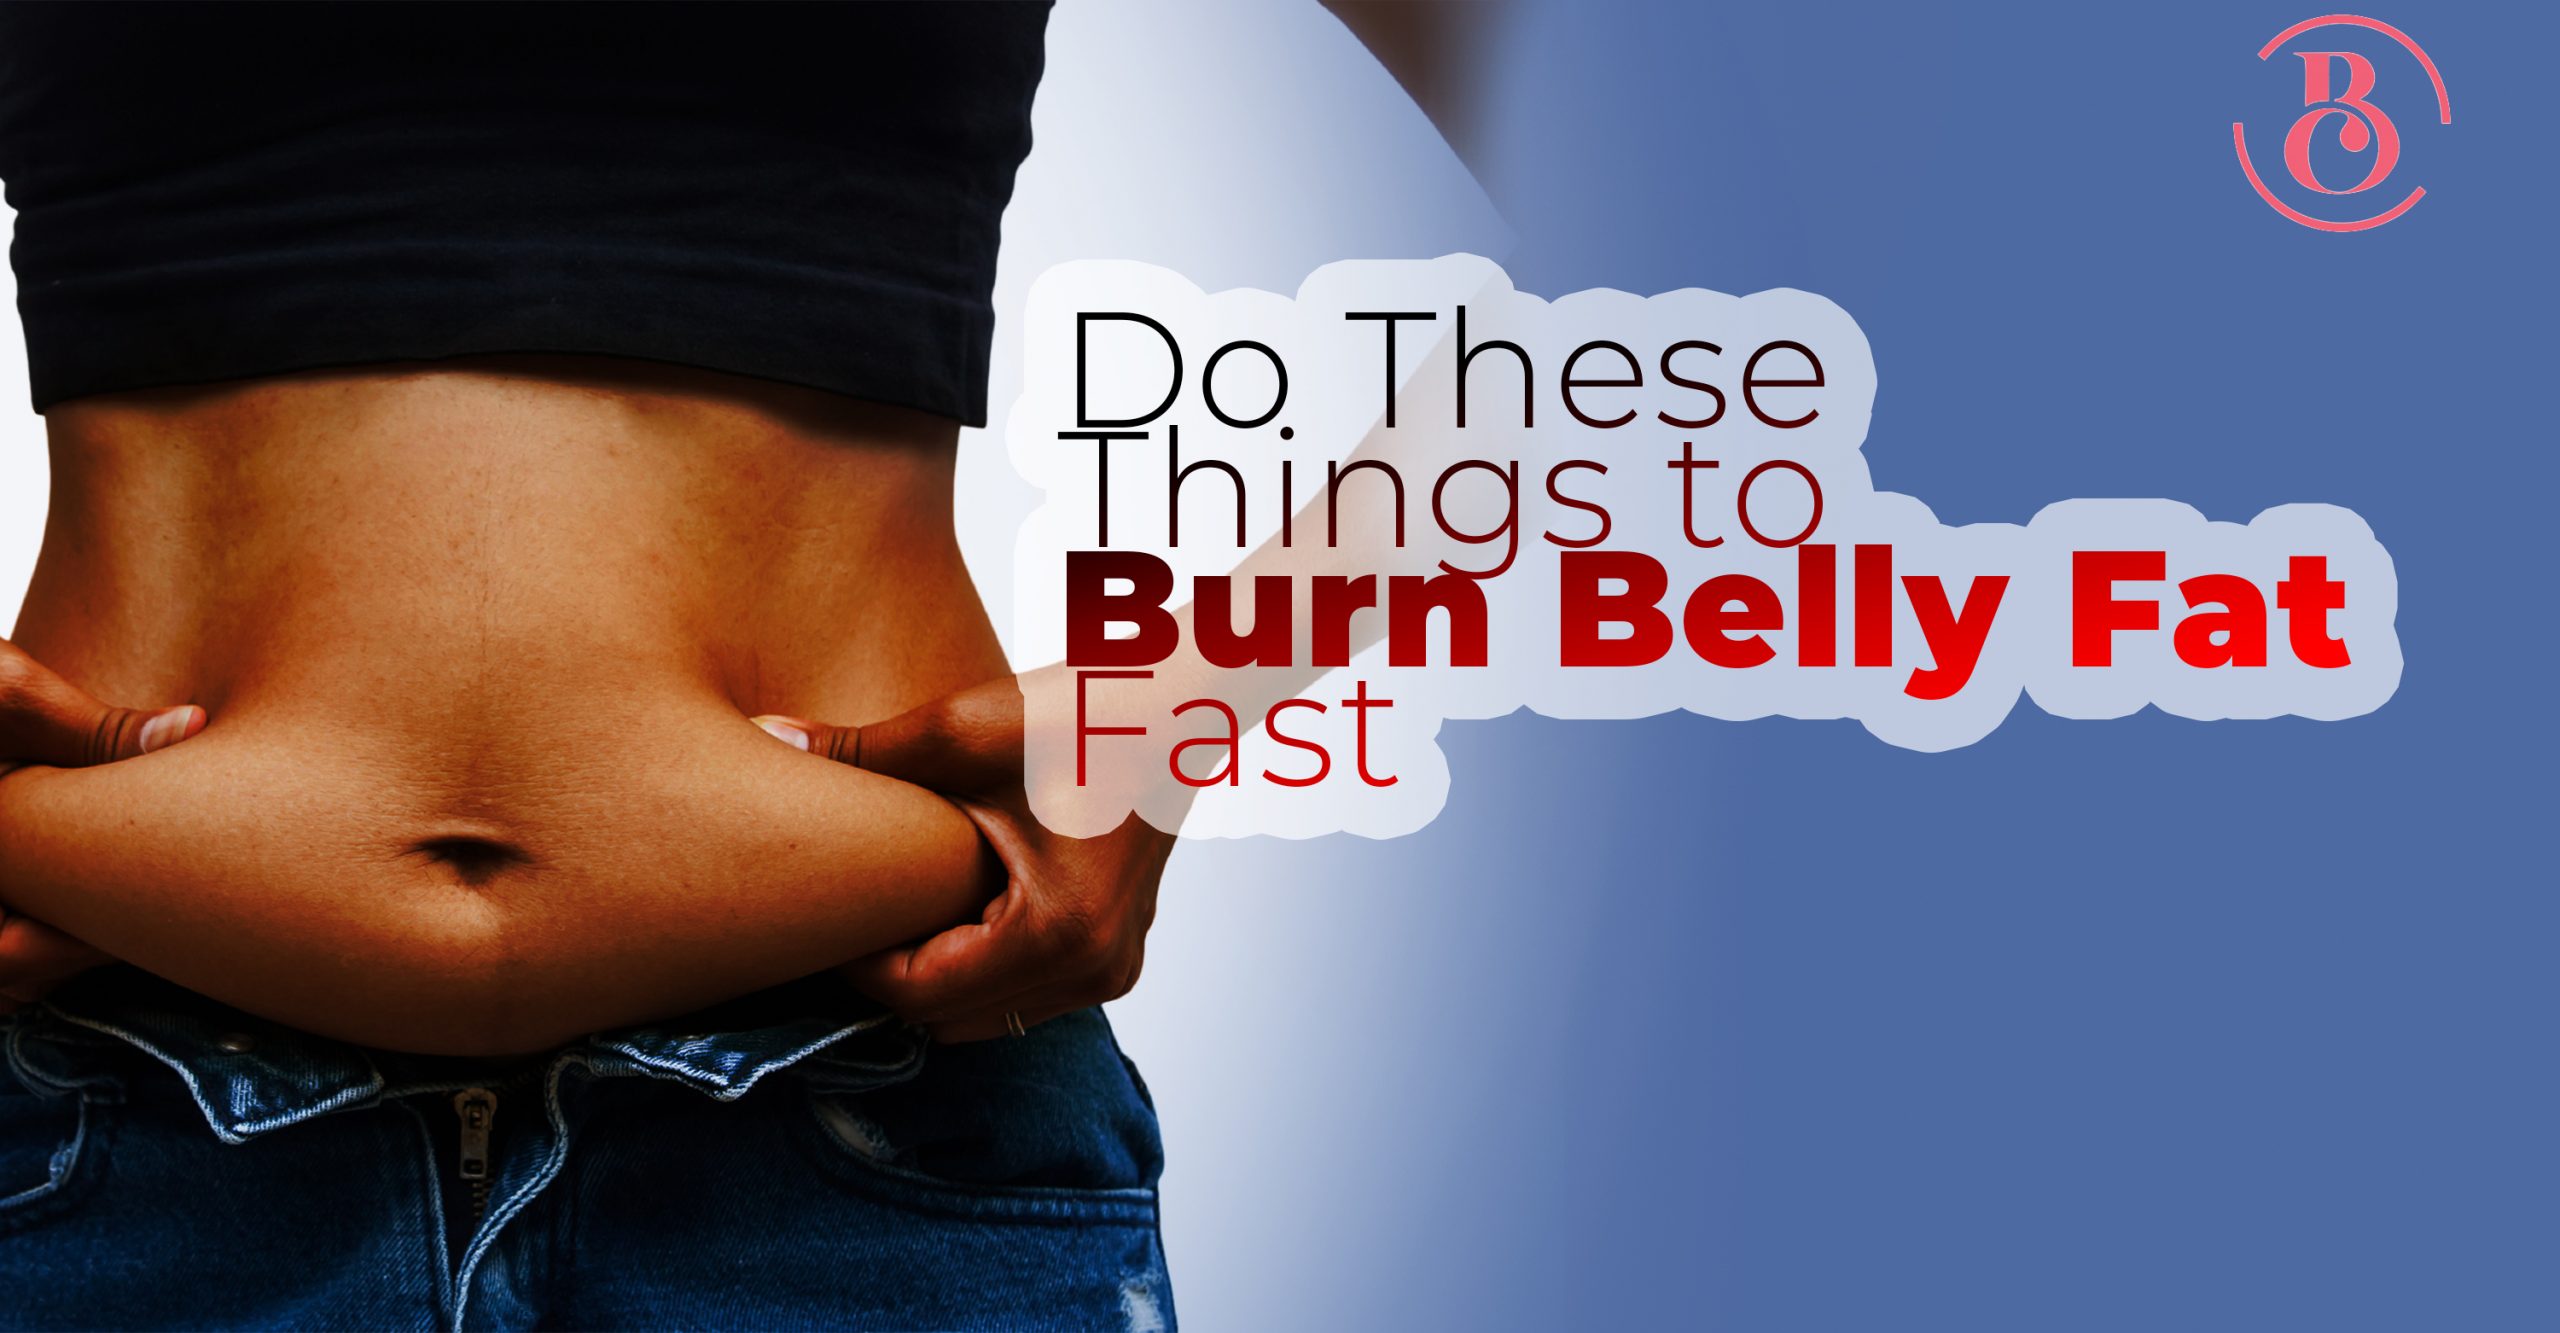 Do These 12 Things to Burn Belly Fat Fast